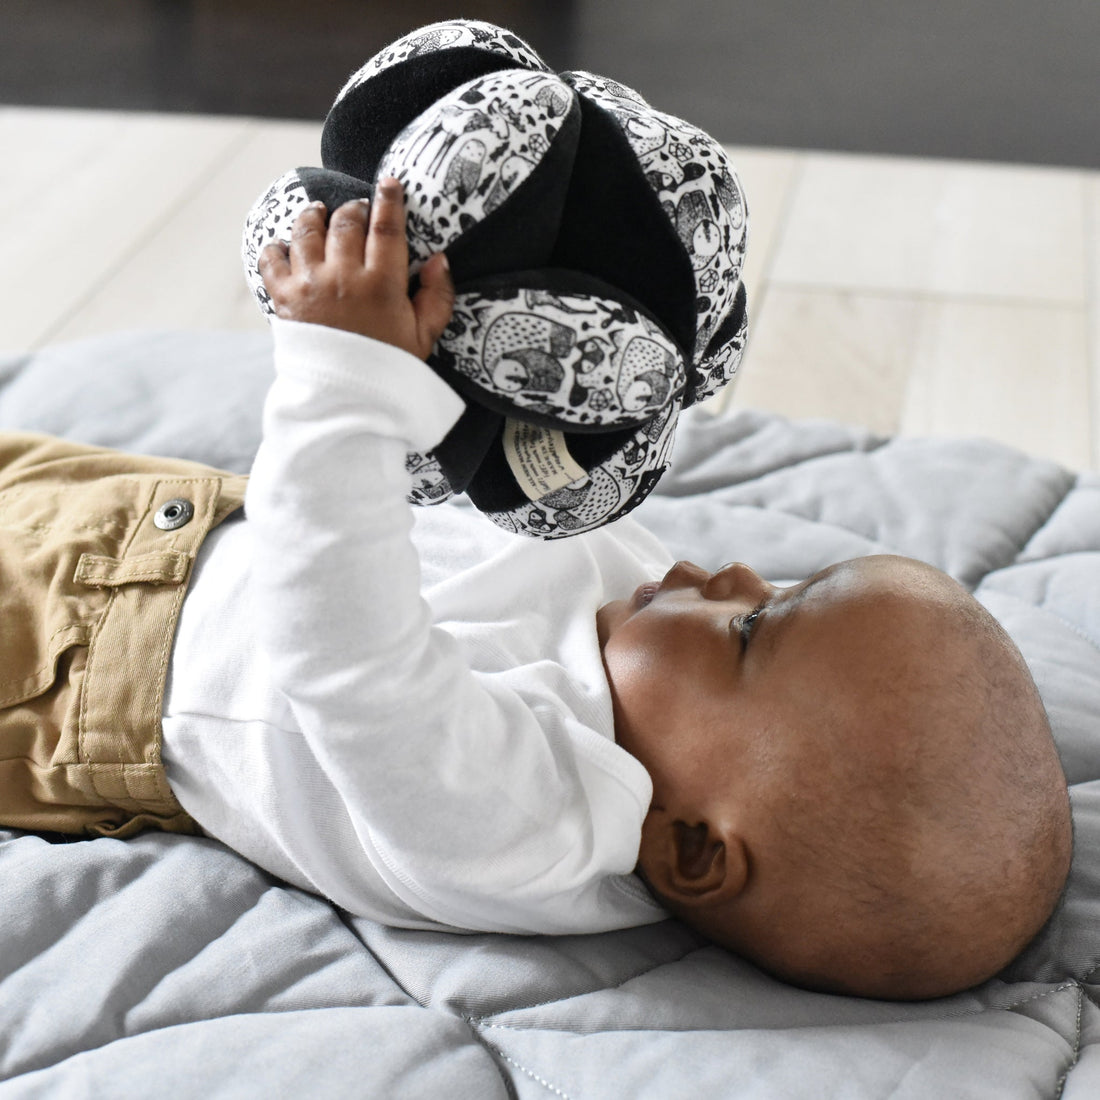 baby boy laying and holding ball up to gaze at its black and white pattern